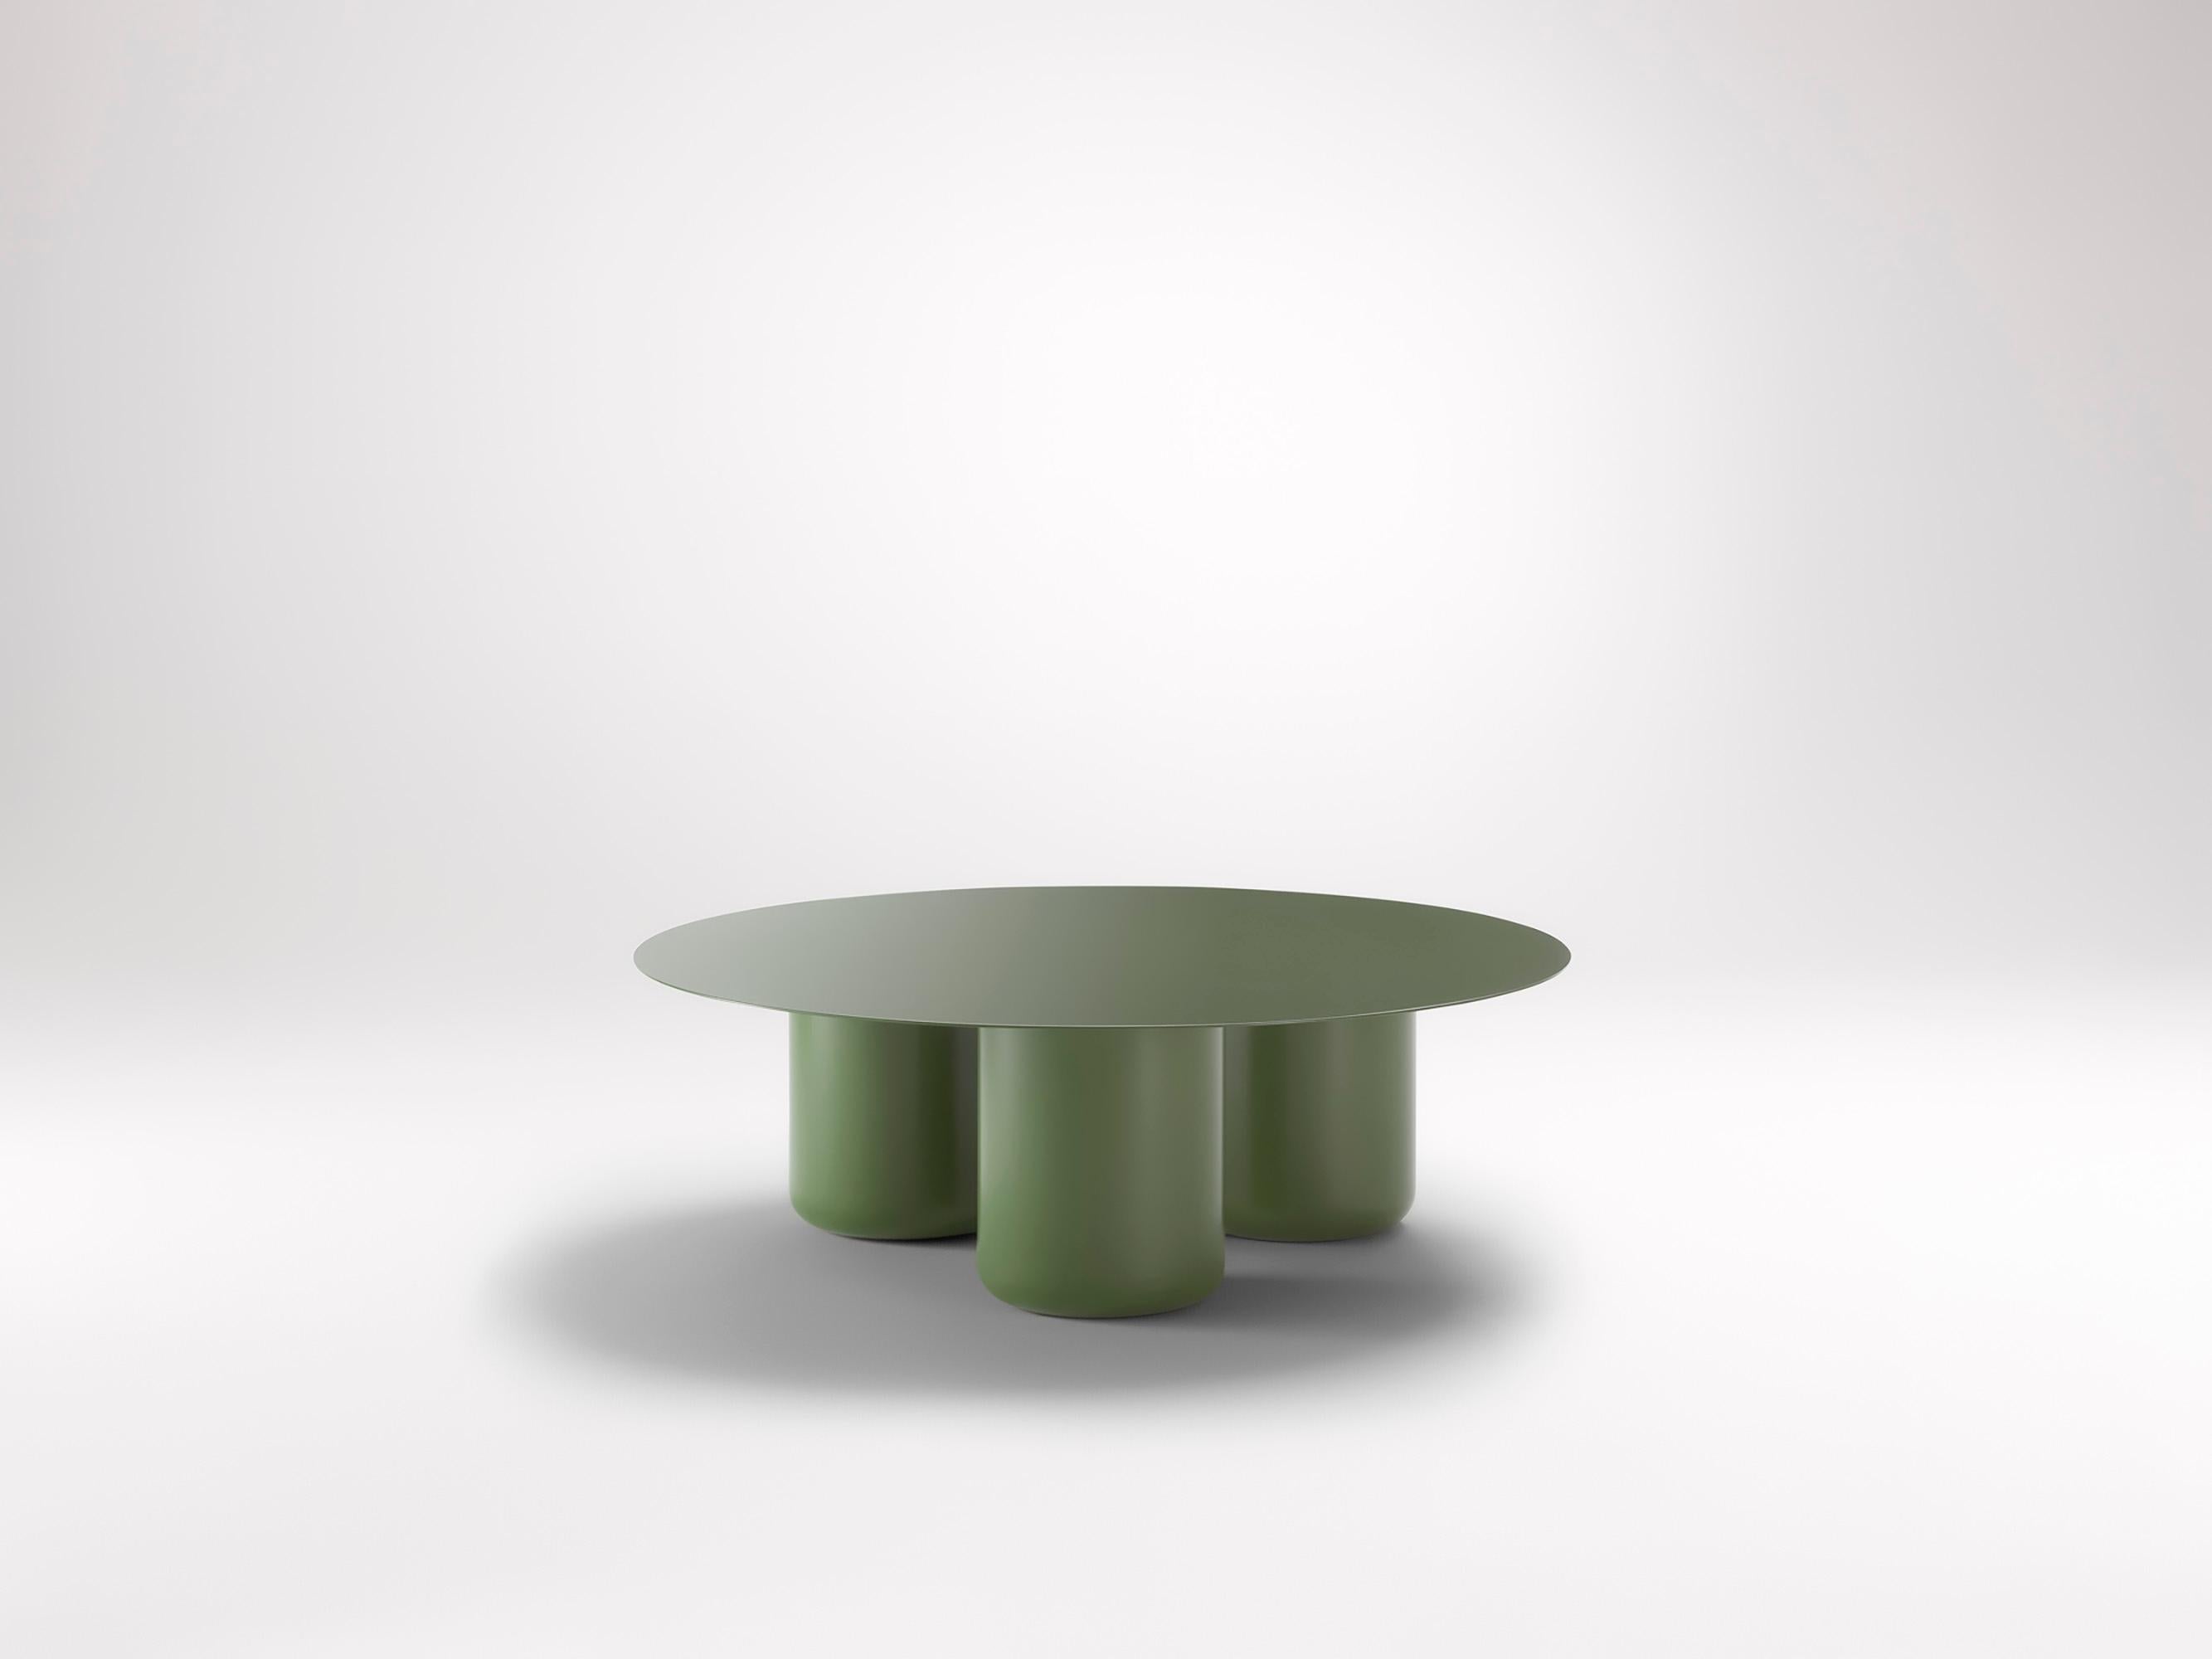 Pale Eucalypt Round Table by Coco Flip
Dimensions: D 100 x H 32 / 36 / 40 / 42 cm
Materials: Mild steel, powder-coated with zinc undercoat. 
Weight: 34 kg

Coco Flip is a Melbourne based furniture and lighting design studio, run by us, Kate Stokes